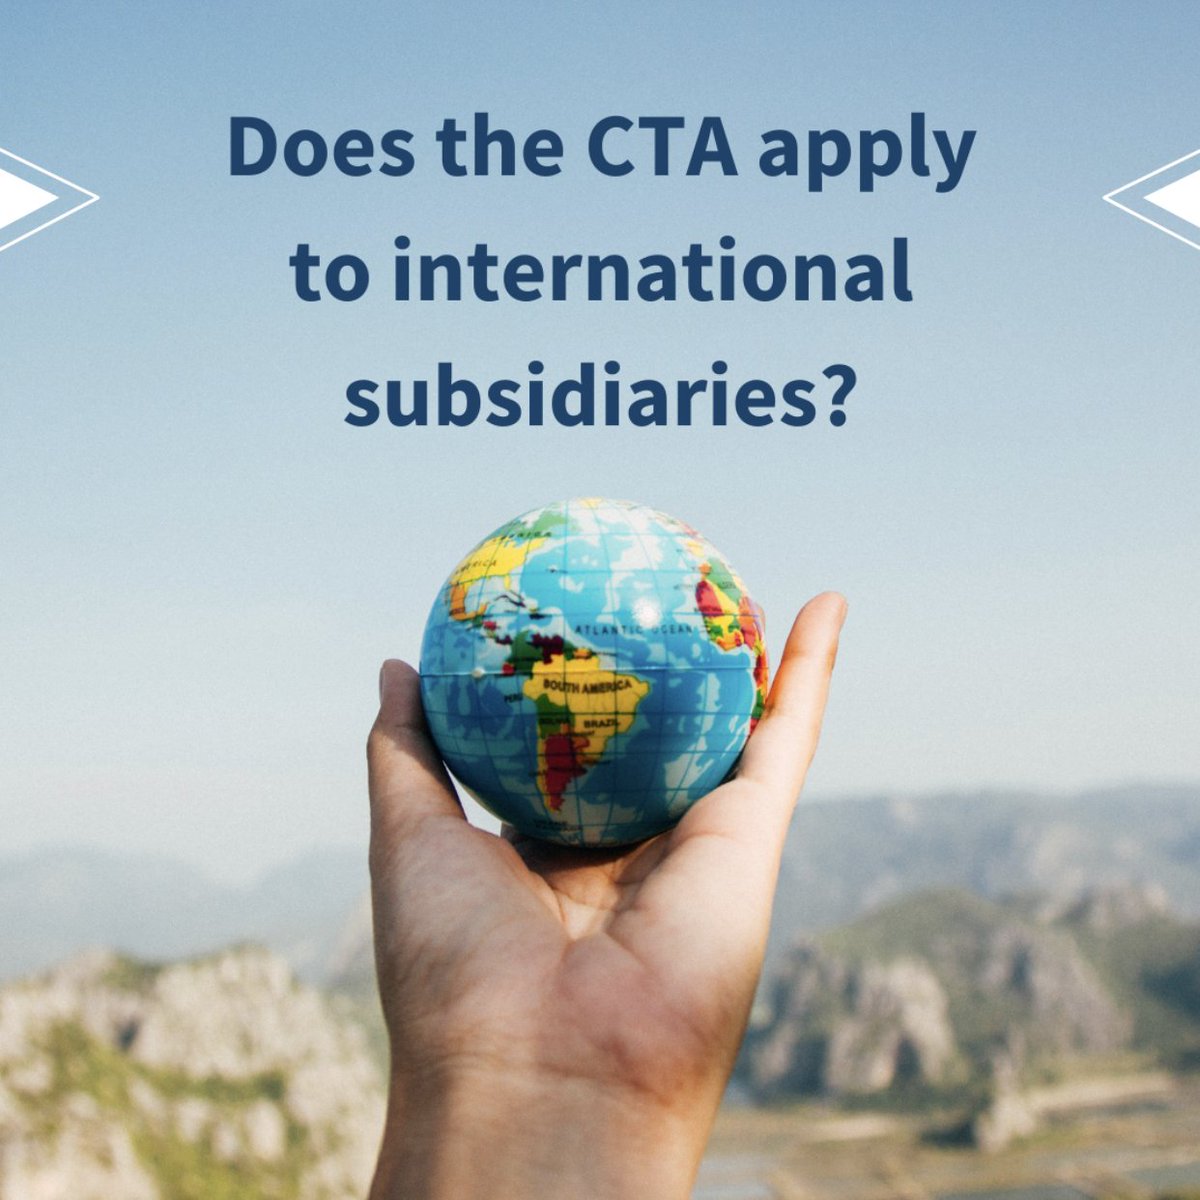 Does the CTA affect international subsidiaries? Yes, foreign entities operating in the US must comply by reporting ownership details. Multinationals must understand their role within the CTA framework.

#CorporateTransparency #FinancialRegulation #GlobalBusiness #Compliance